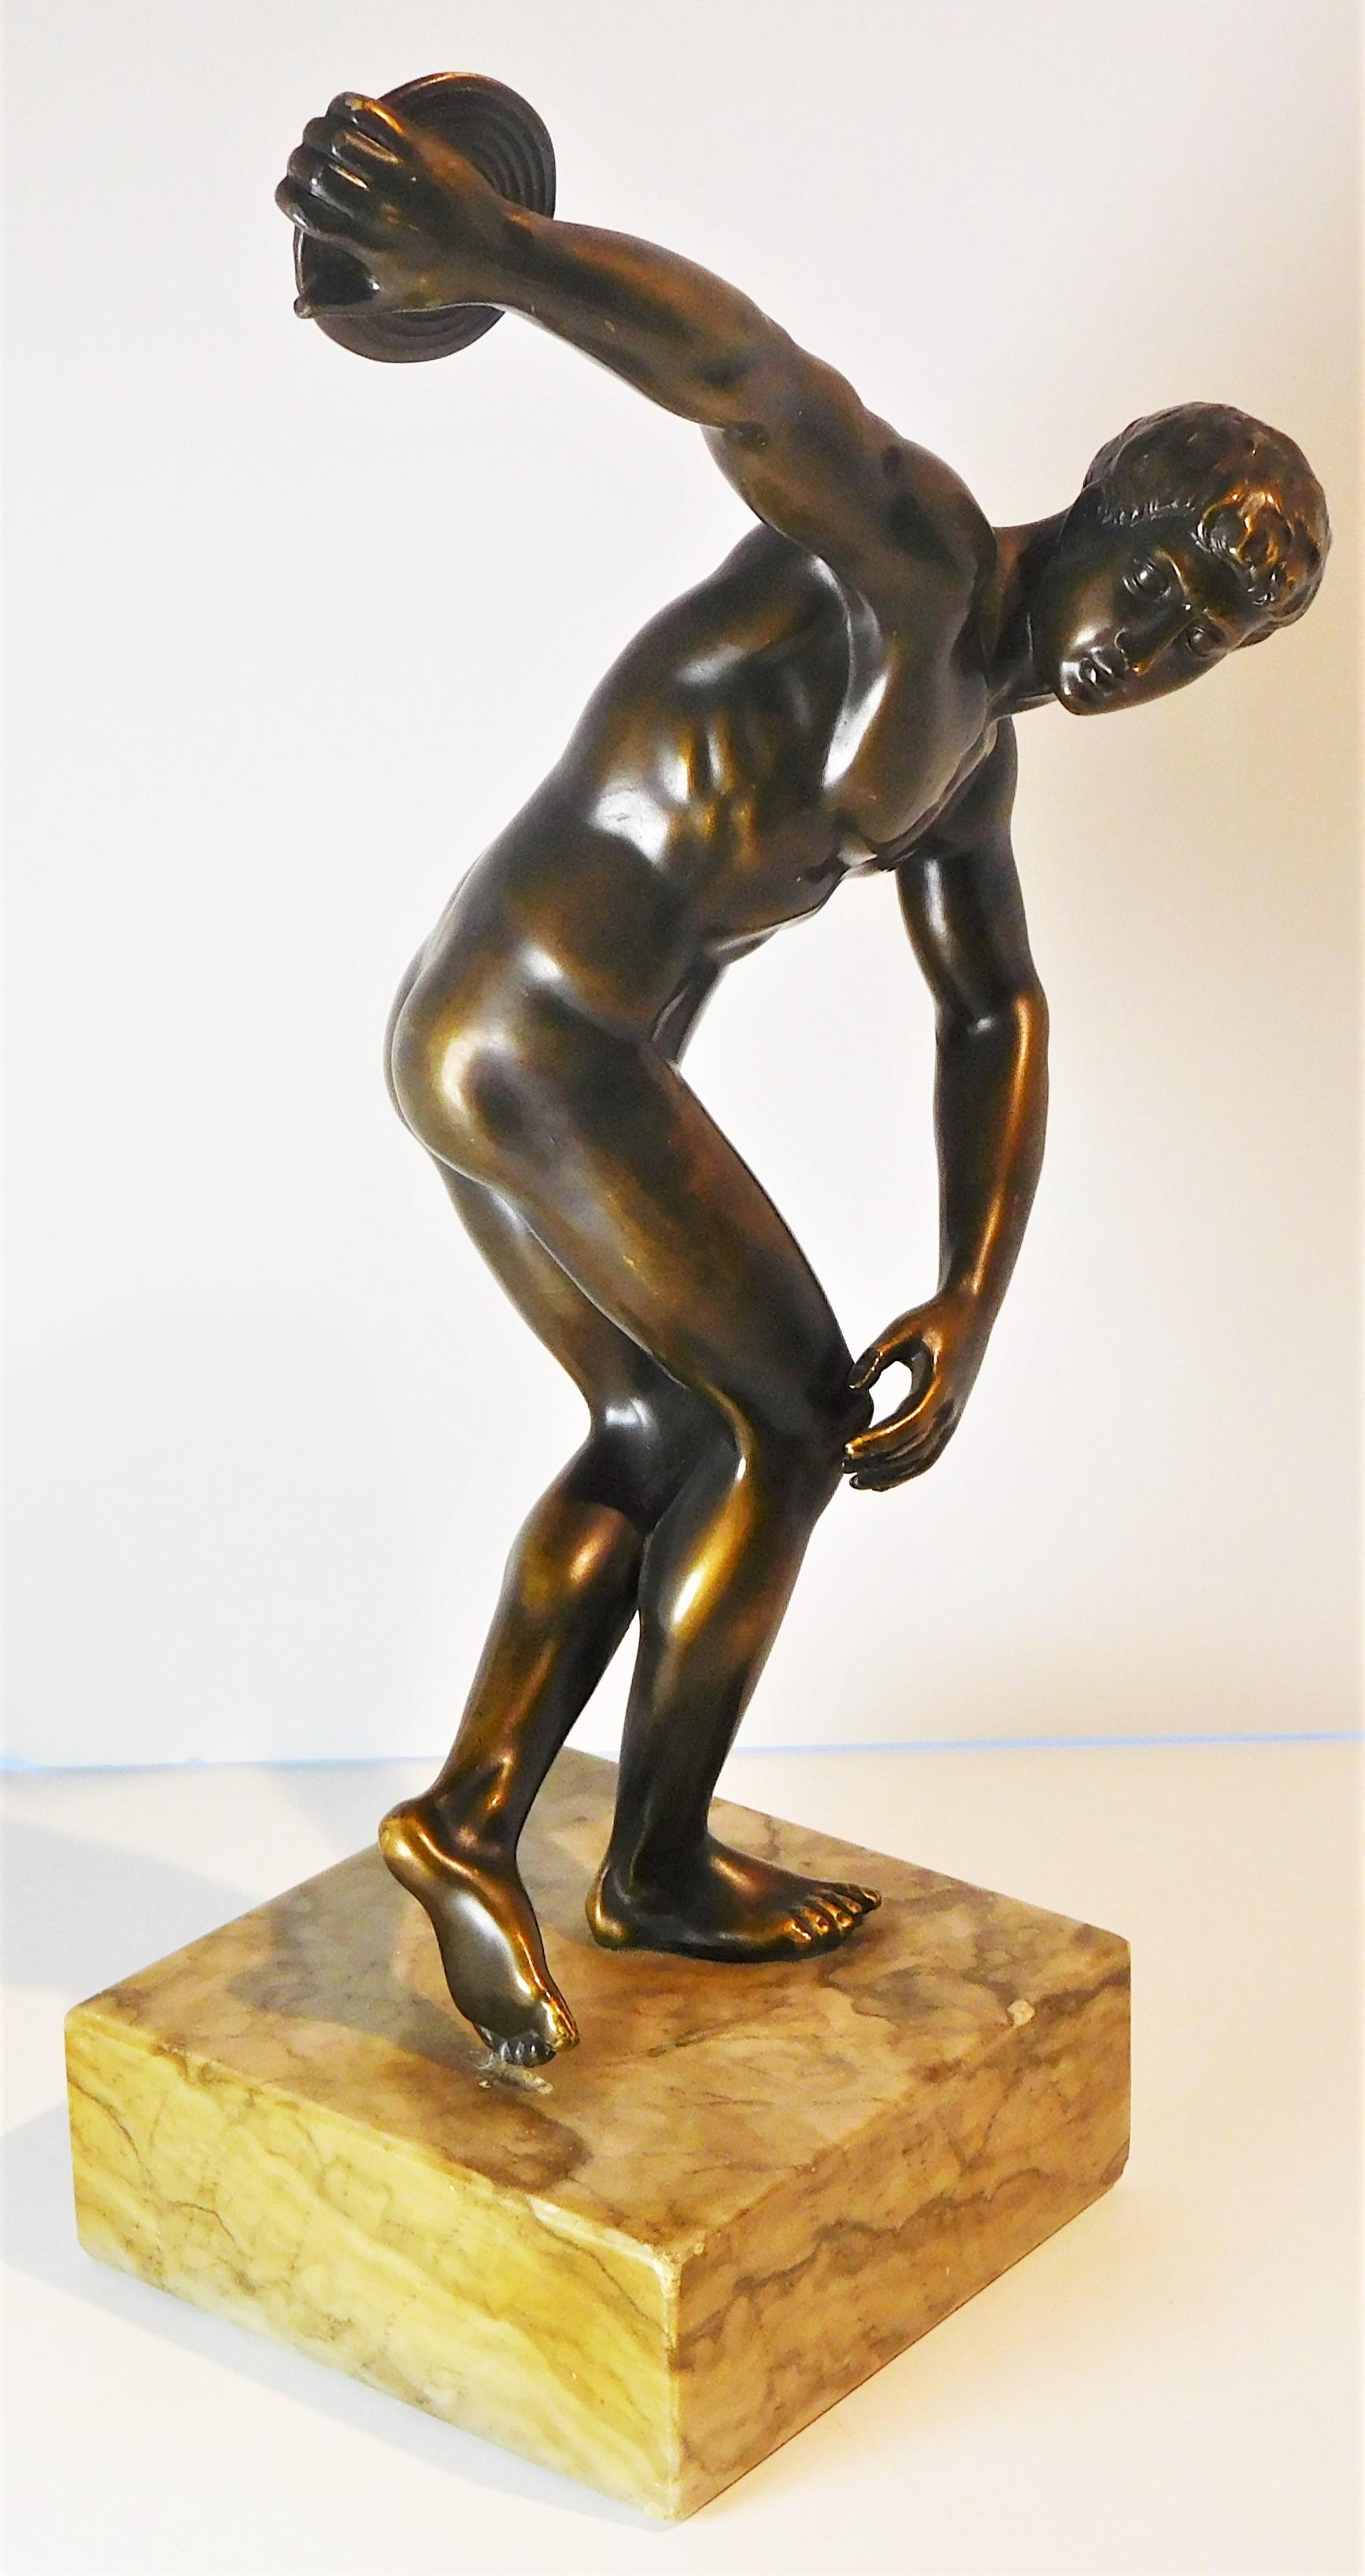 This bronze grand tour souvenir after the classical figure of the discuss throwing athlete by the Greek sculptor Myron, circa 460 BC, has a dark. Mellow, golden brown patina. It is attached to a striated marble plinth base by a recessed flat head